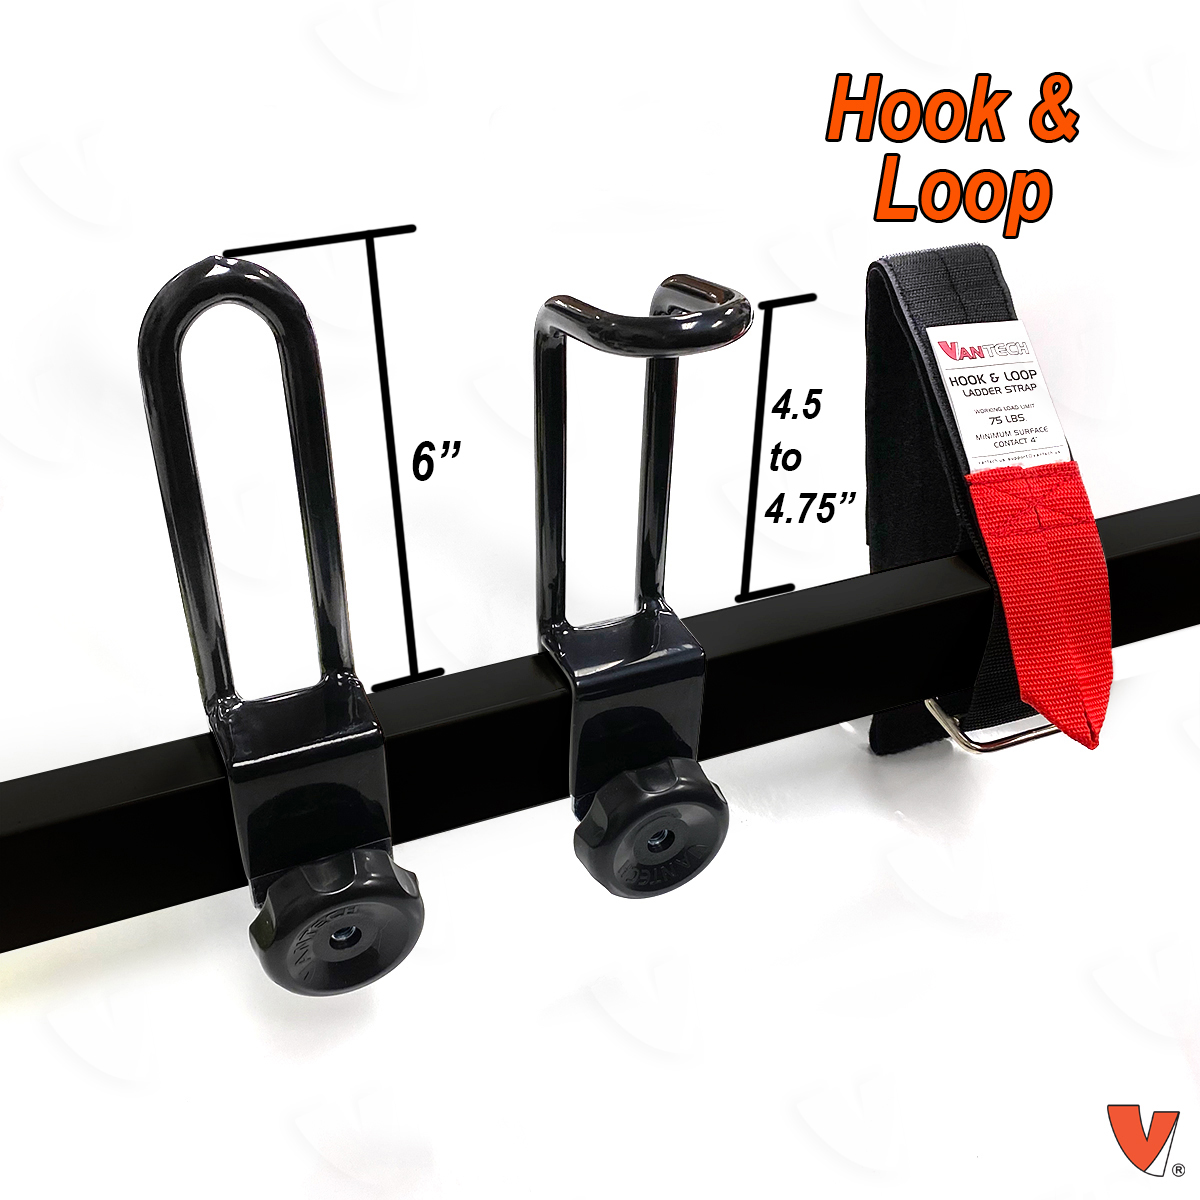 H1 Ladder Rack for Sprinter 2002-06 Low Roof by Vantech